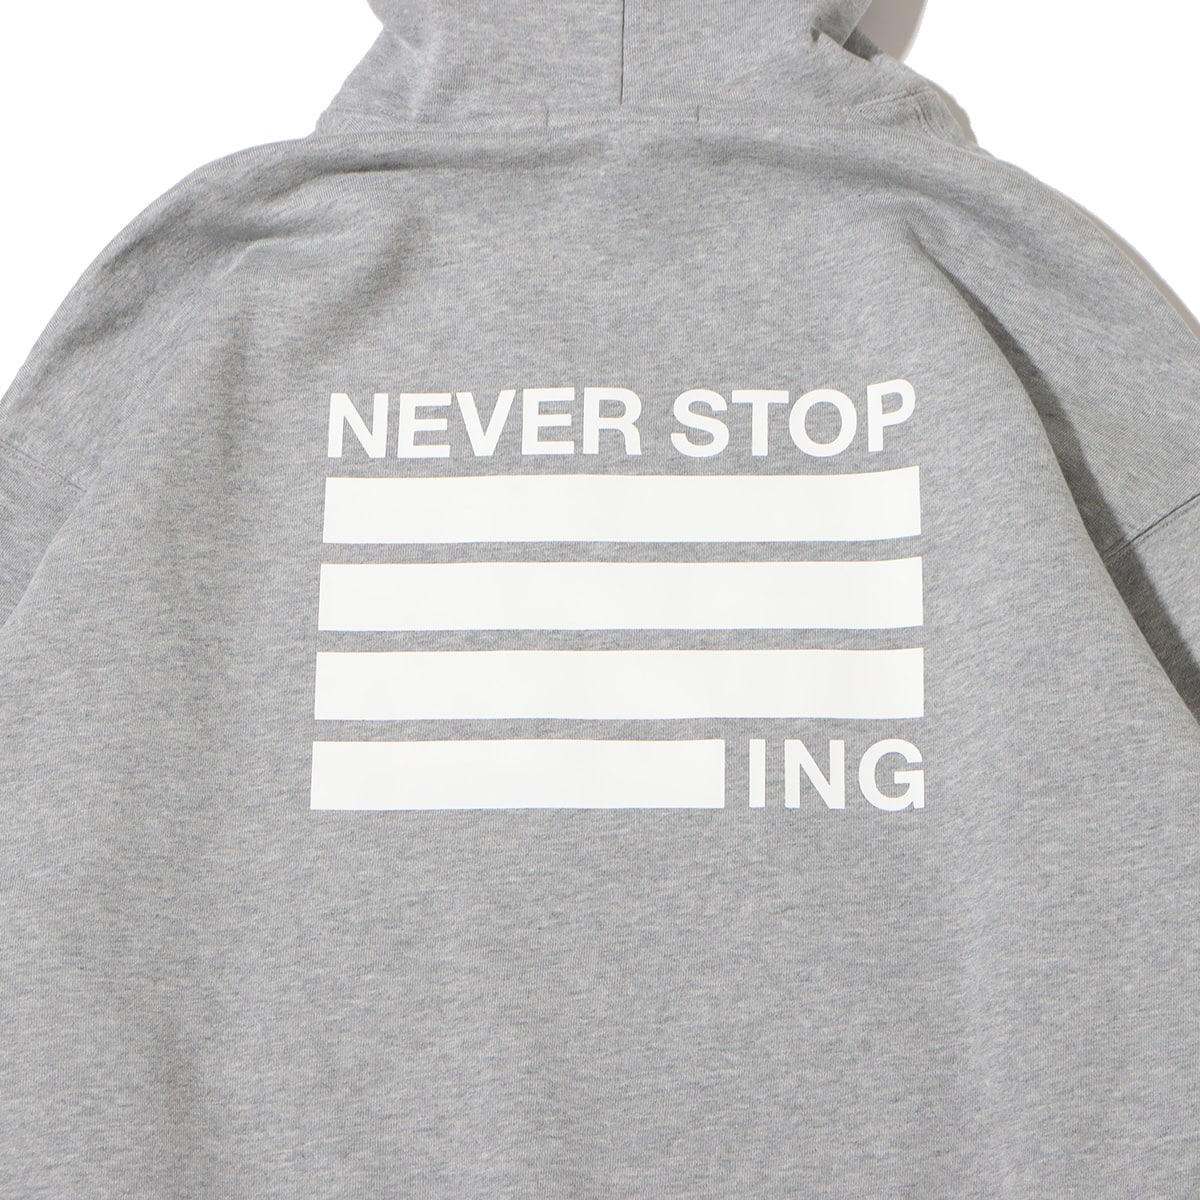 THE NORTH FACE NEVER STOP ING HOODIE MIXグレー